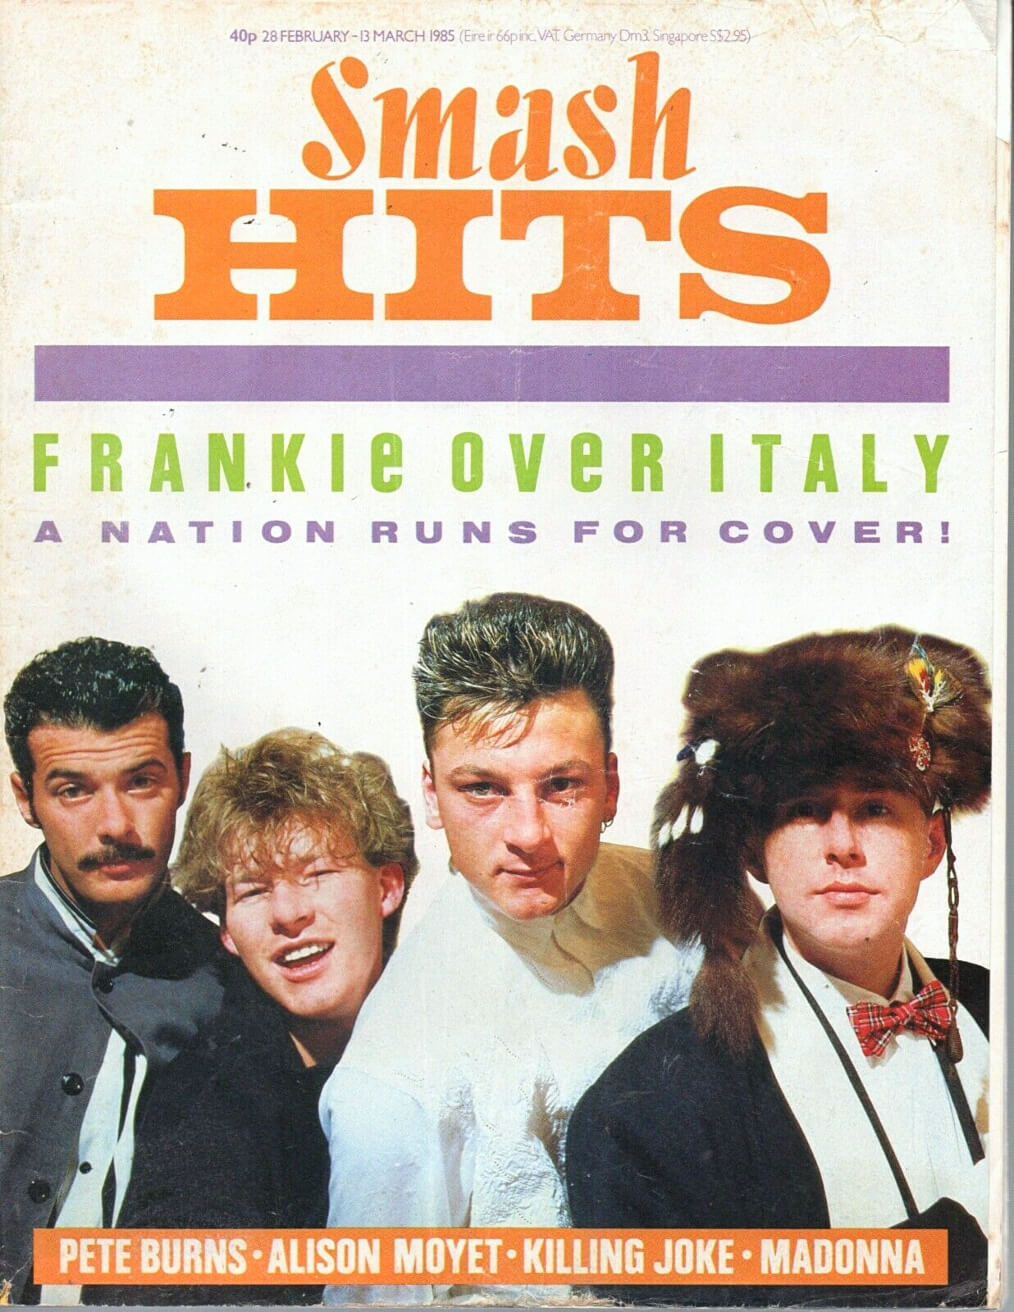 <p>Smash Hits 28 Feb - 11 Mar 1985 - “Frankie Over Italy - A Nation Runs For Cover!” Frankie Goes To Hollywood</p>